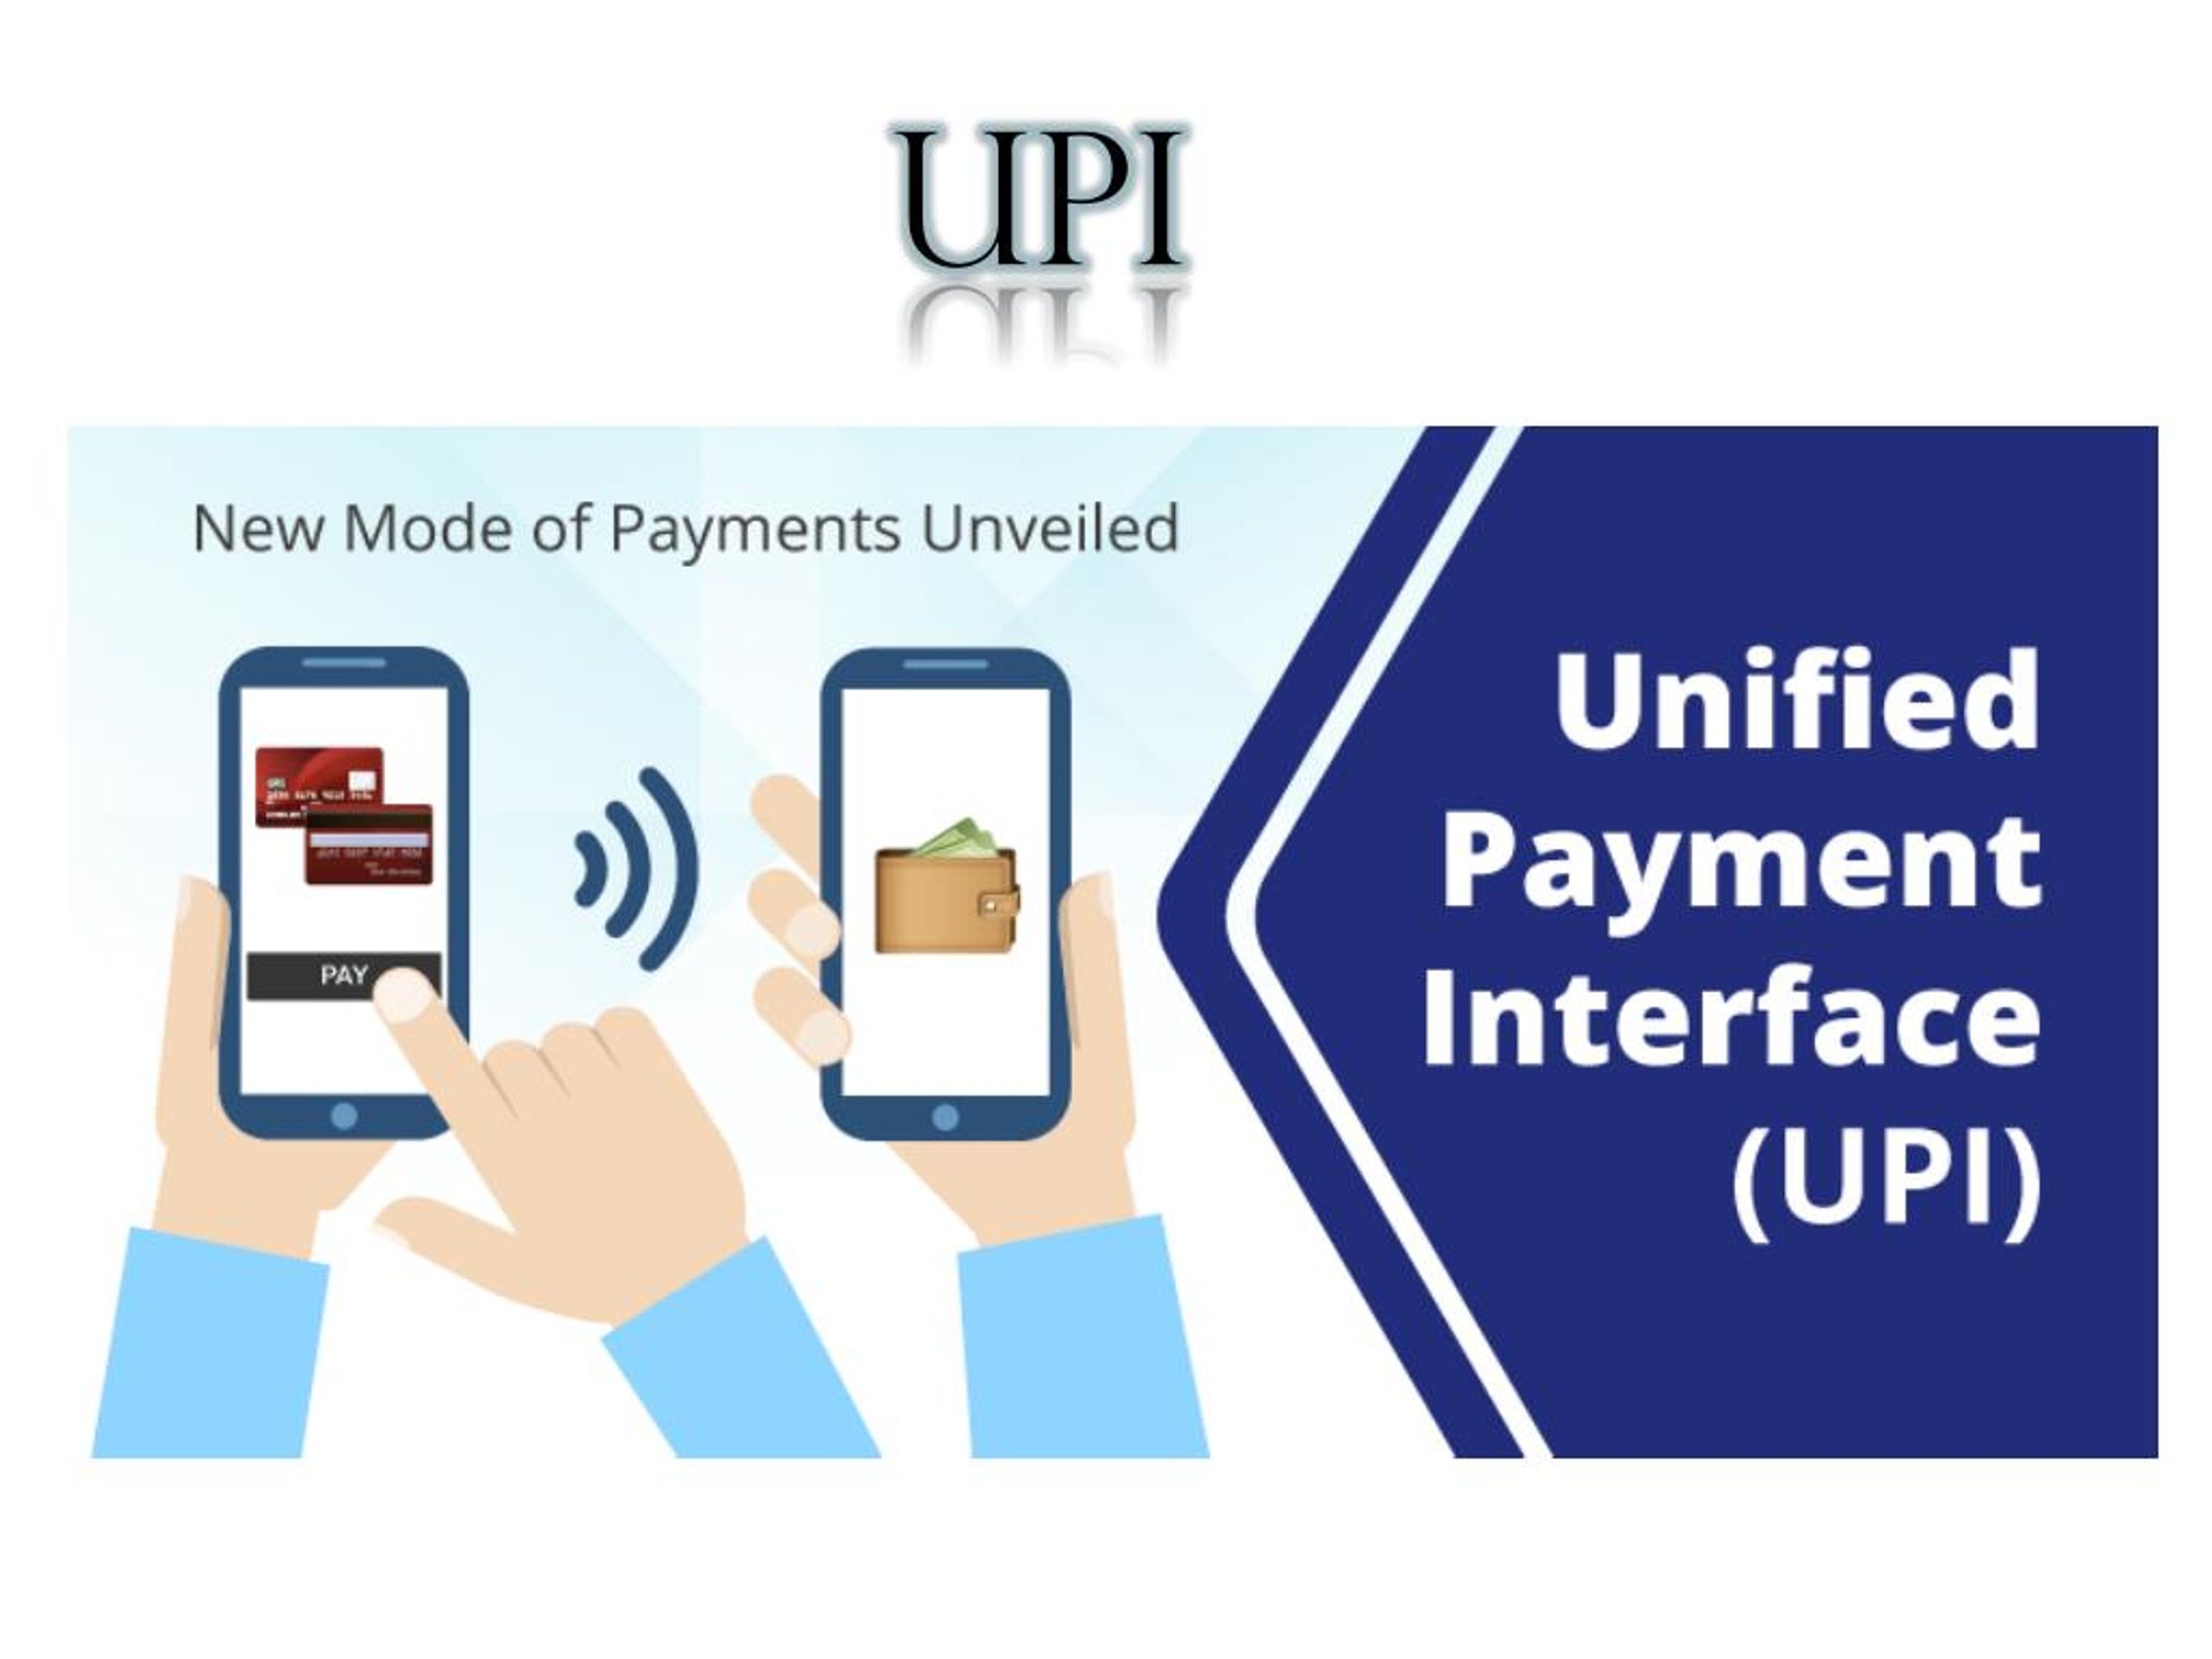 Unified payments interface. UPI interface. Unified payments Фирер. UPI Registration. Make him pay